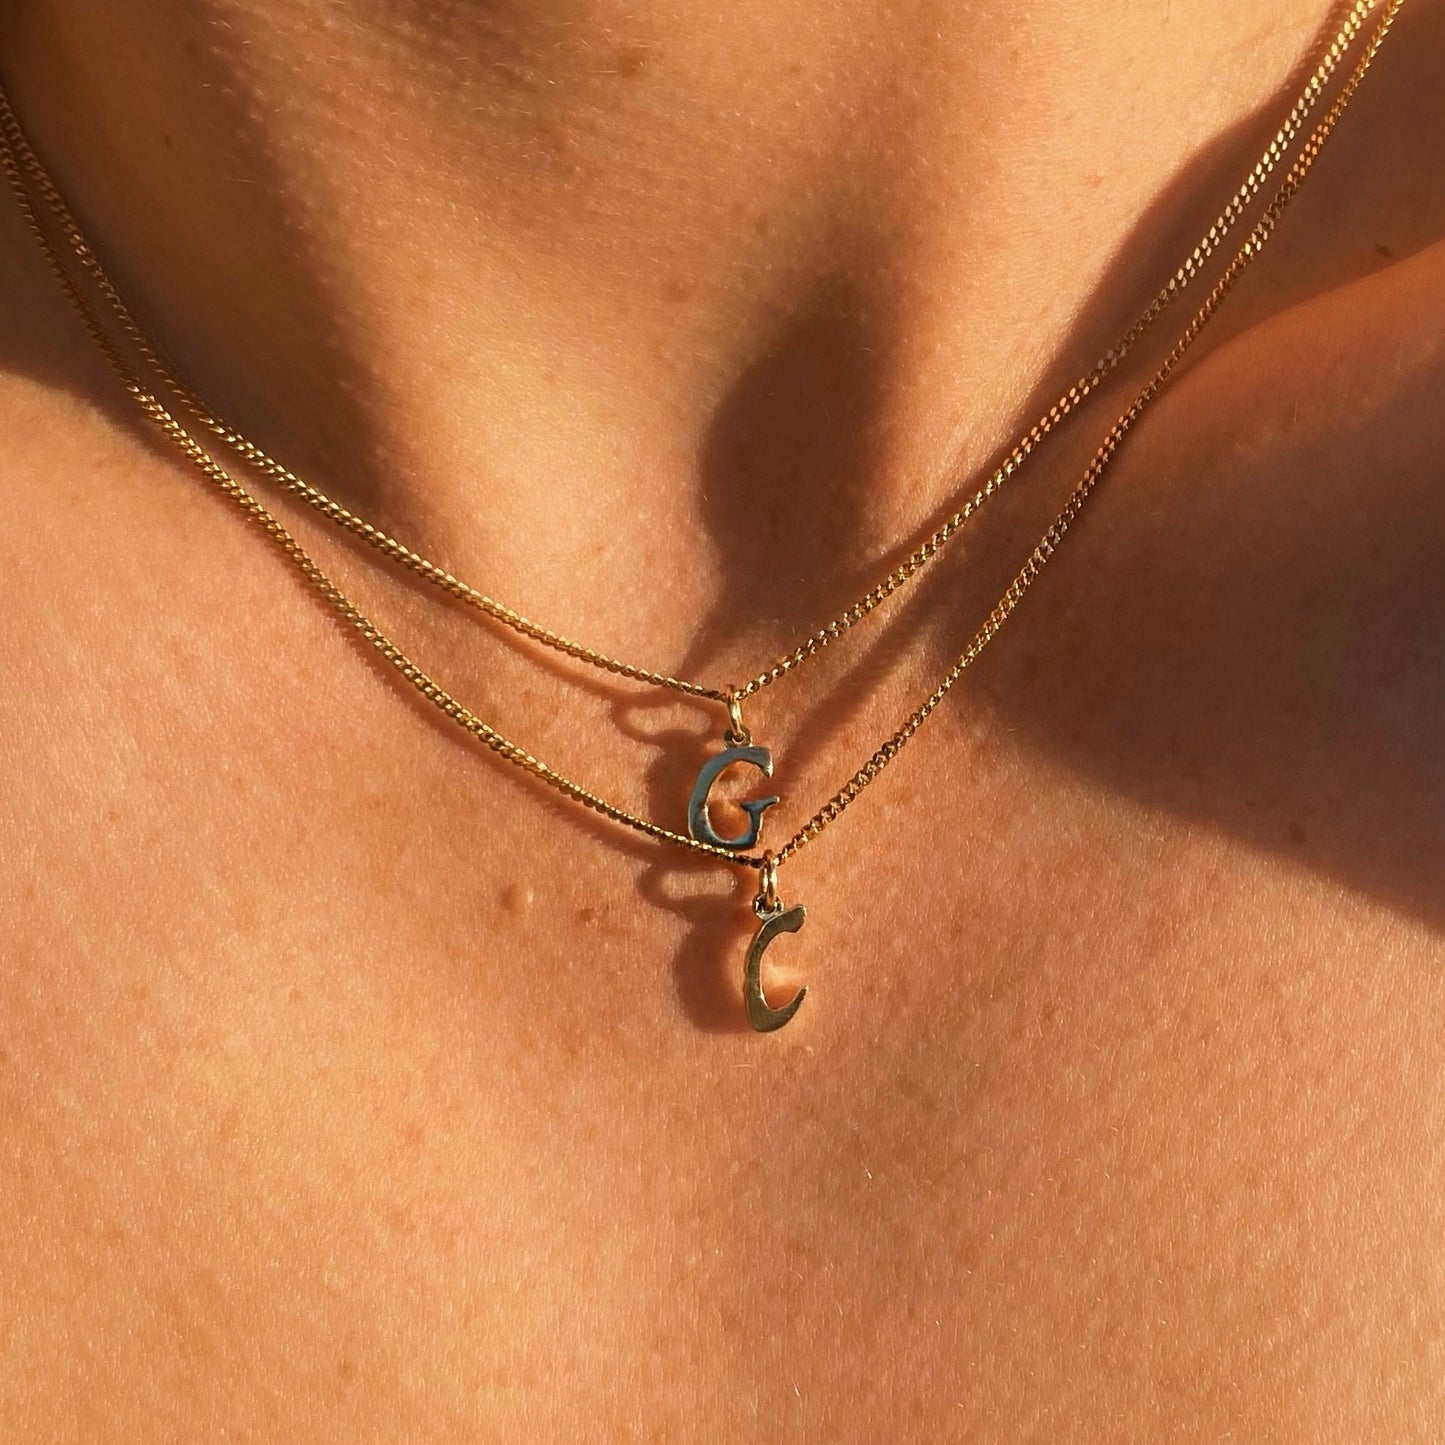 Initial pendant necklace - 9K gold